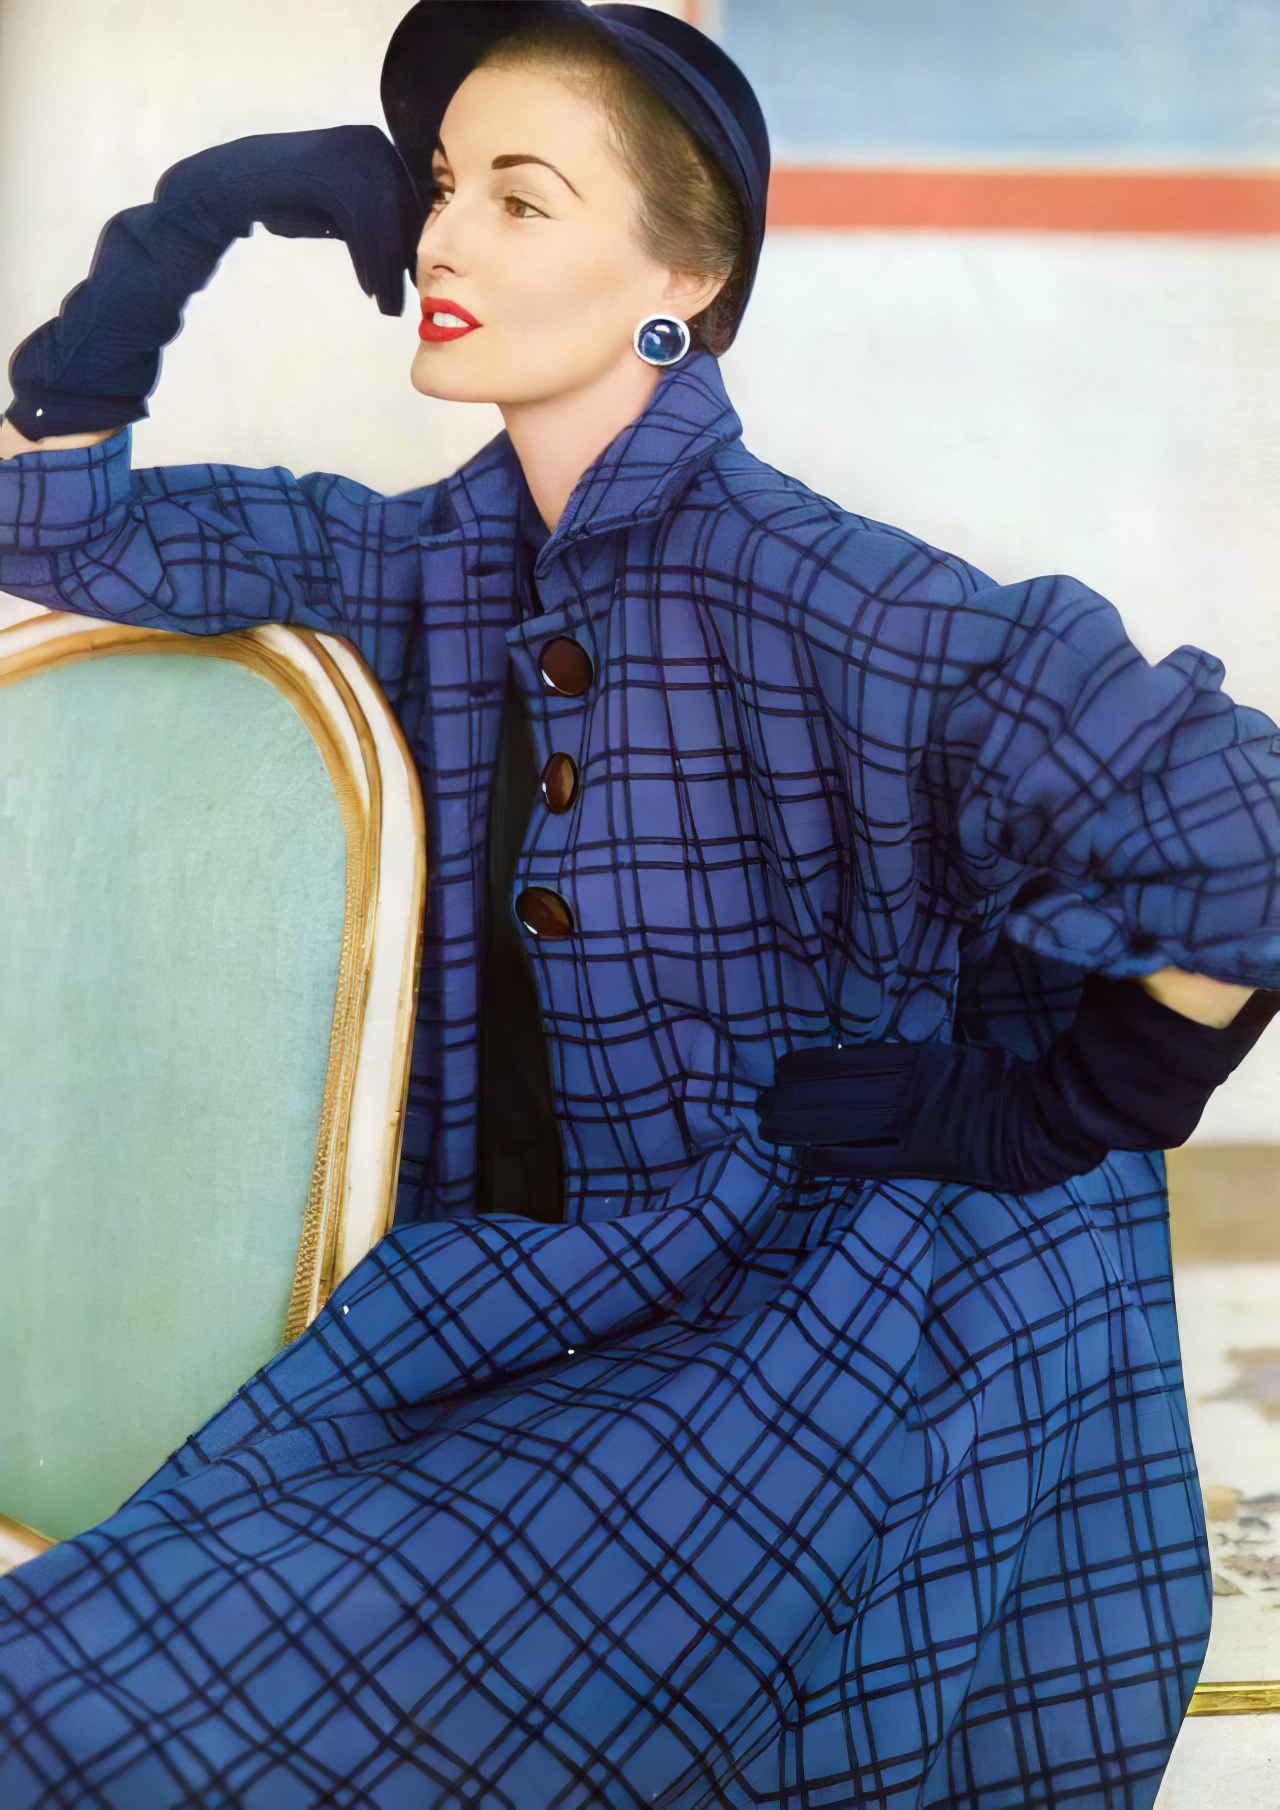 Elise Daniels in a blue and black check flared coat by Juilliard Wool for Junior Sophisticates, Vogue US, September 1951.